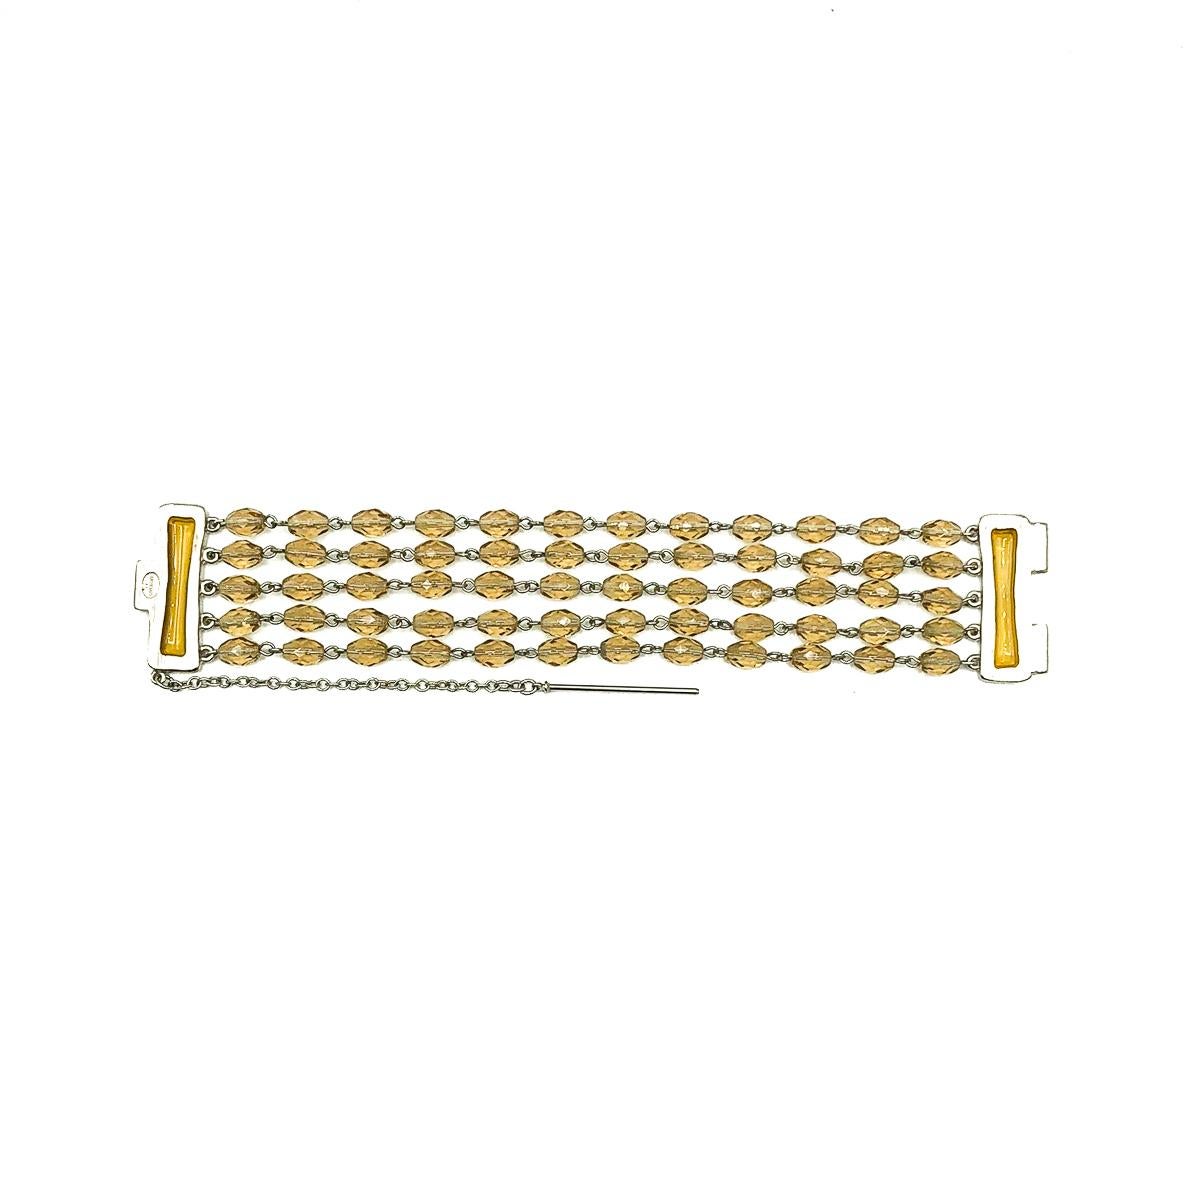 A Vintage Givenchy Citrine Glass Bracelet. Crafted with brushed silvertone metal, faceted glass citrine beads and resin plaques in the feature clasp. In very good vintage condition, signed and approx. 20cm long by 3.6cm wide  A gorgeous piece from